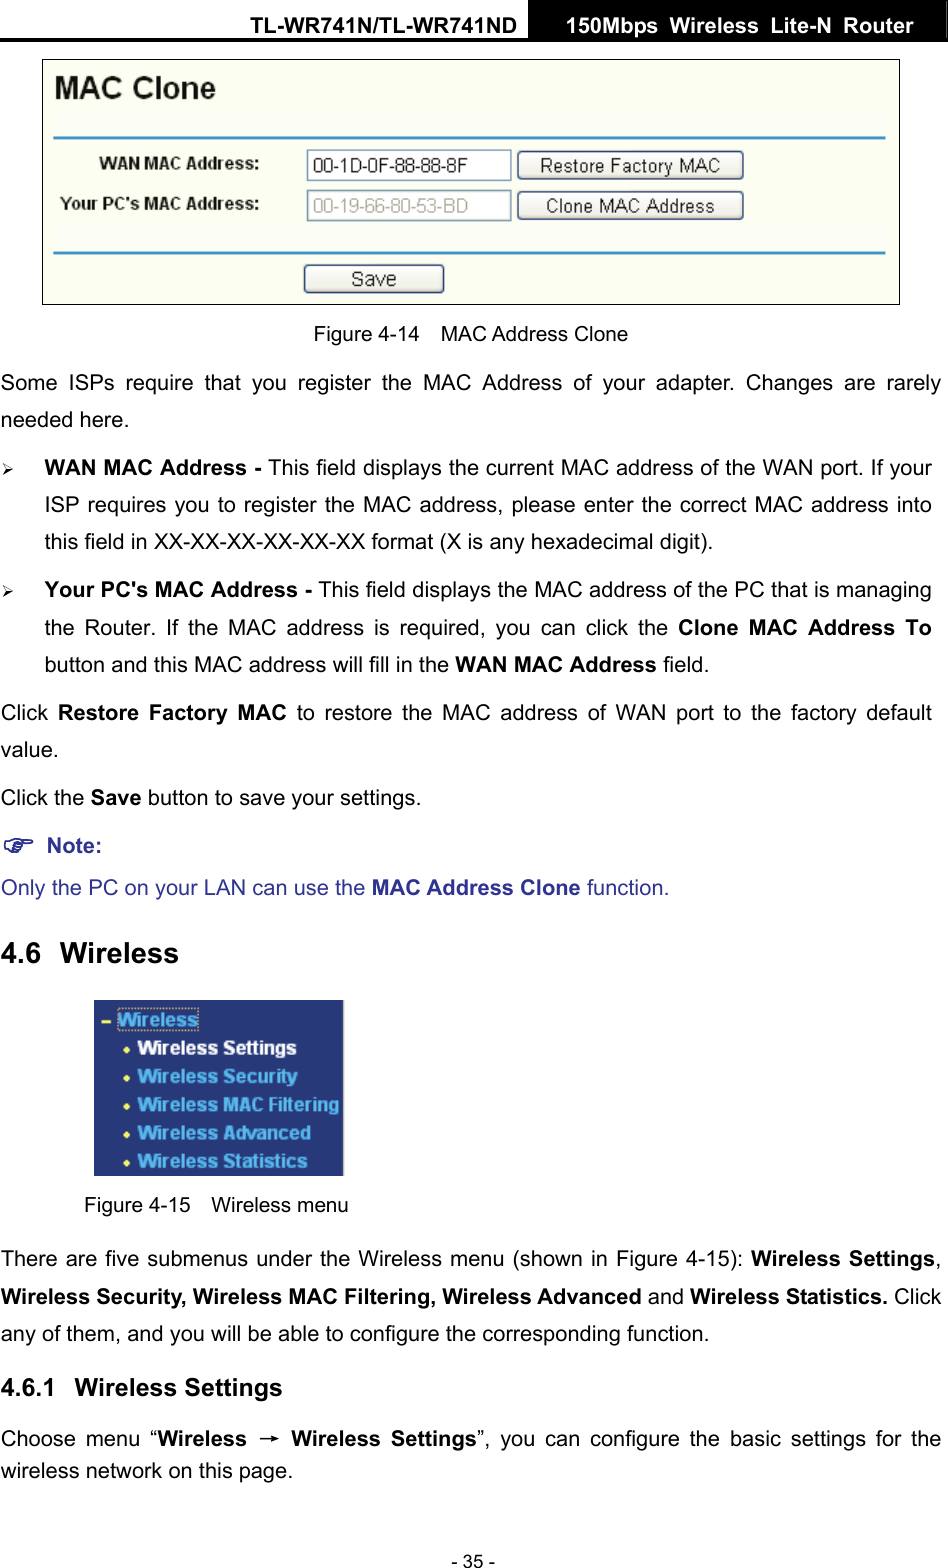 TL-WR741N/TL-WR741ND  150Mbps Wireless Lite-N Router   - 35 -  Figure 4-14  MAC Address Clone Some ISPs require that you register the MAC Address of your adapter. Changes are rarely needed here. ¾ WAN MAC Address - This field displays the current MAC address of the WAN port. If your ISP requires you to register the MAC address, please enter the correct MAC address into this field in XX-XX-XX-XX-XX-XX format (X is any hexadecimal digit).   ¾ Your PC&apos;s MAC Address - This field displays the MAC address of the PC that is managing the Router. If the MAC address is required, you can click the Clone MAC Address To button and this MAC address will fill in the WAN MAC Address field. Click  Restore Factory MAC to restore the MAC address of WAN port to the factory default value. Click the Save button to save your settings. ) Note:  Only the PC on your LAN can use the MAC Address Clone function. 4.6  Wireless  Figure 4-15  Wireless menu There are five submenus under the Wireless menu (shown in Figure 4-15): Wireless Settings, Wireless Security, Wireless MAC Filtering, Wireless Advanced and Wireless Statistics. Click any of them, and you will be able to configure the corresponding function.   4.6.1  Wireless Settings Choose menu “Wireless  → Wireless Settings”, you can configure the basic settings for the wireless network on this page. 